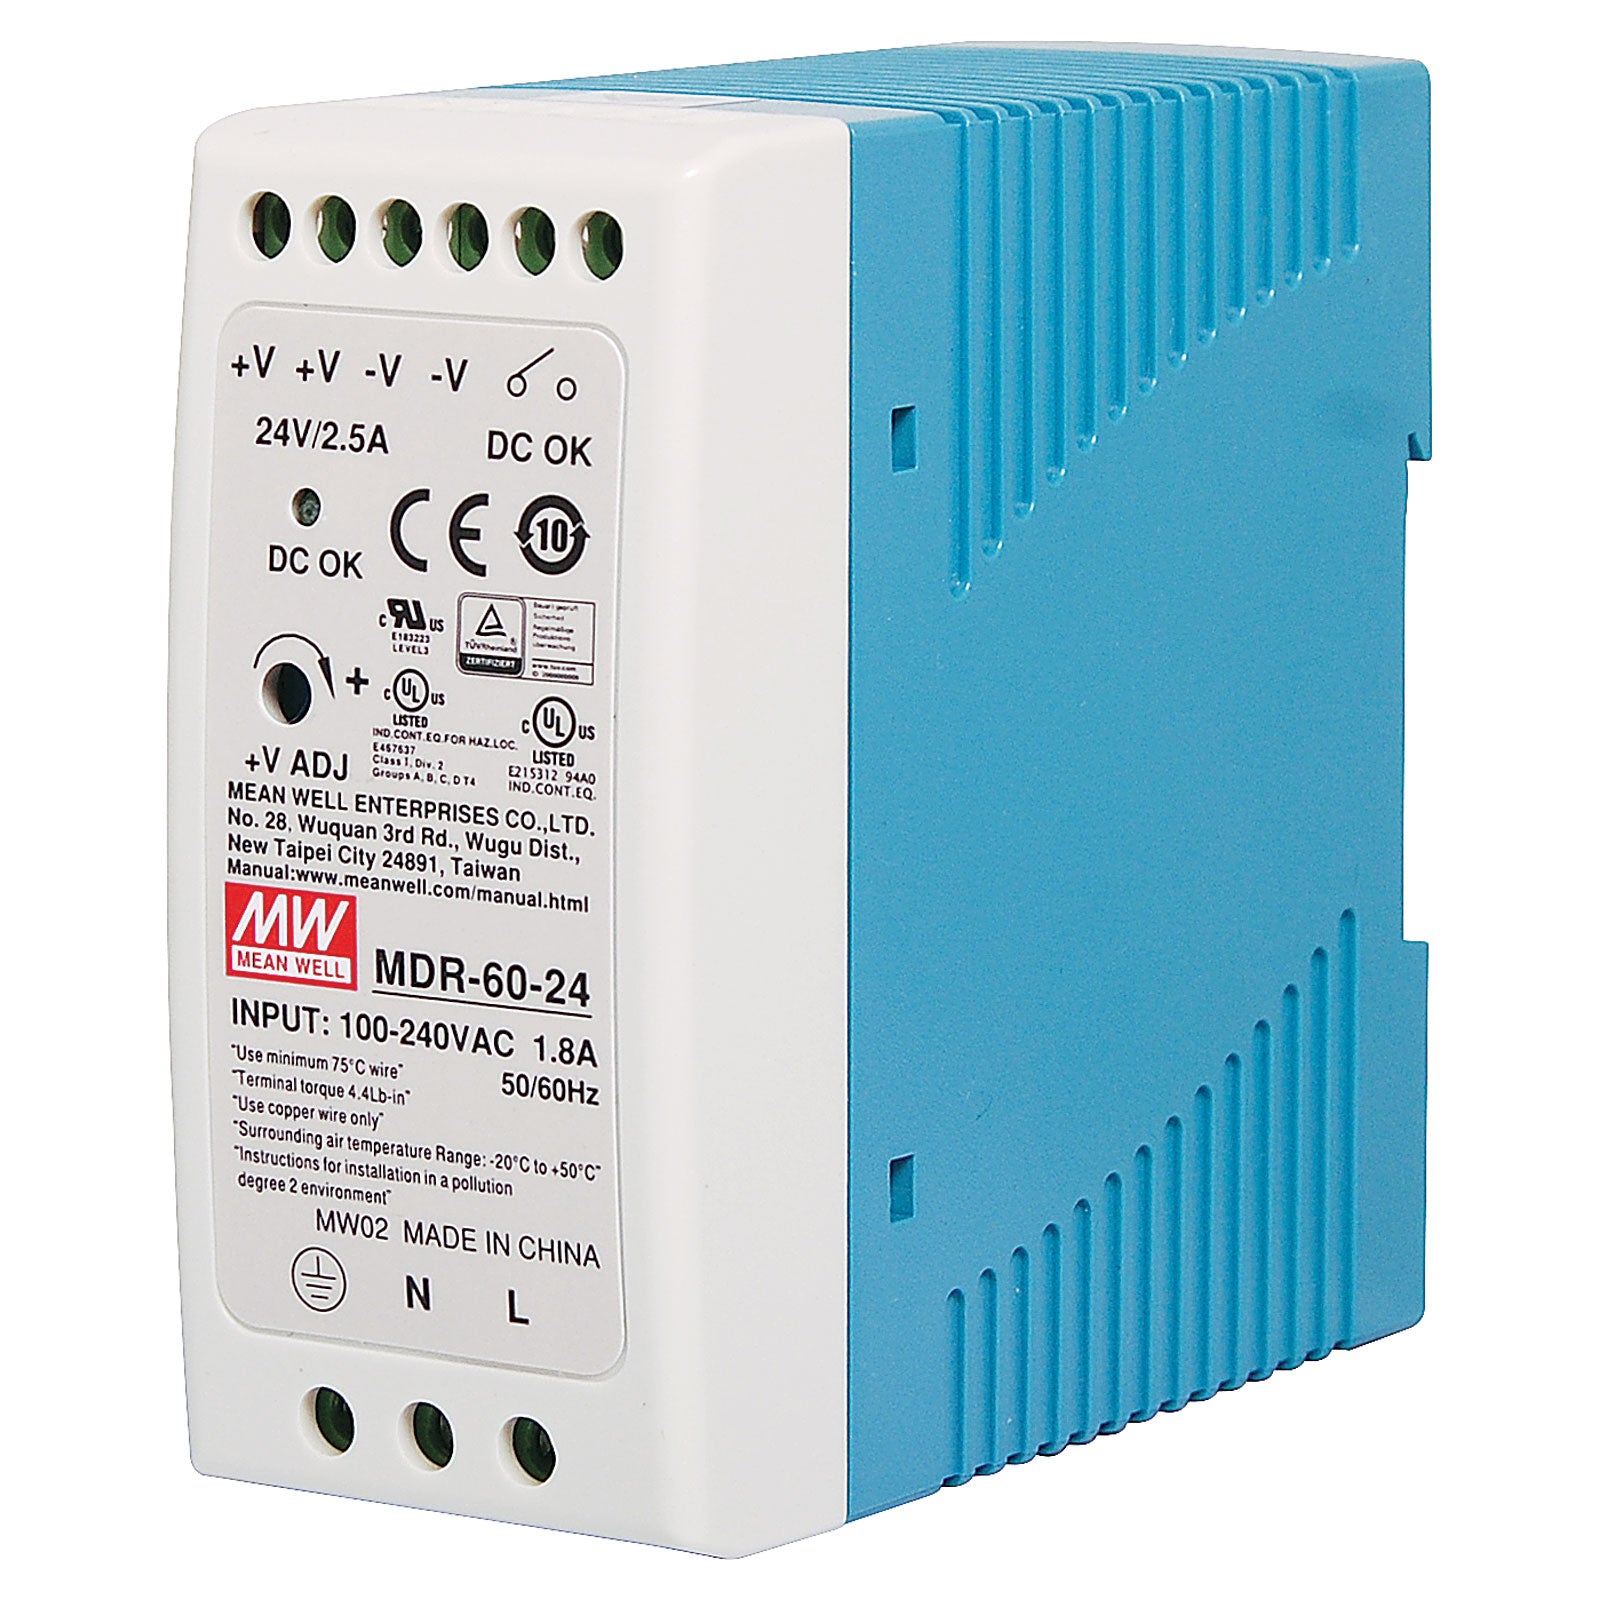 MDR-60-24 - Mean Well 60W DIN Rail Mount Switchmode Power Supply 24VDC 2.5A